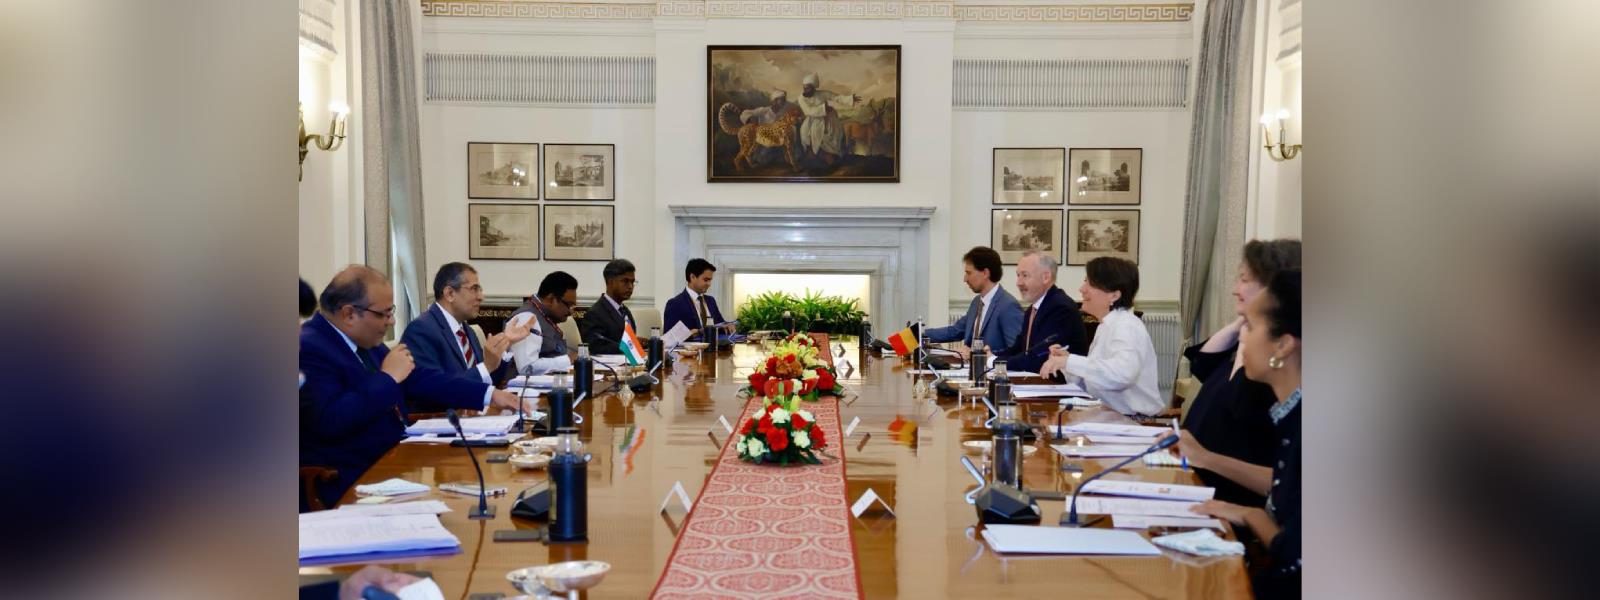 2nd India-Belgium Foreign Office Consultations held in New Delhi, co-chaired by Secretary (West), Shri Pavan Kapoor and H.E. Ms. Theodora Gentzis, Secretary General of the Ministry of Foreign Affairs, Foreign Trade and Development Cooperation of Belgium